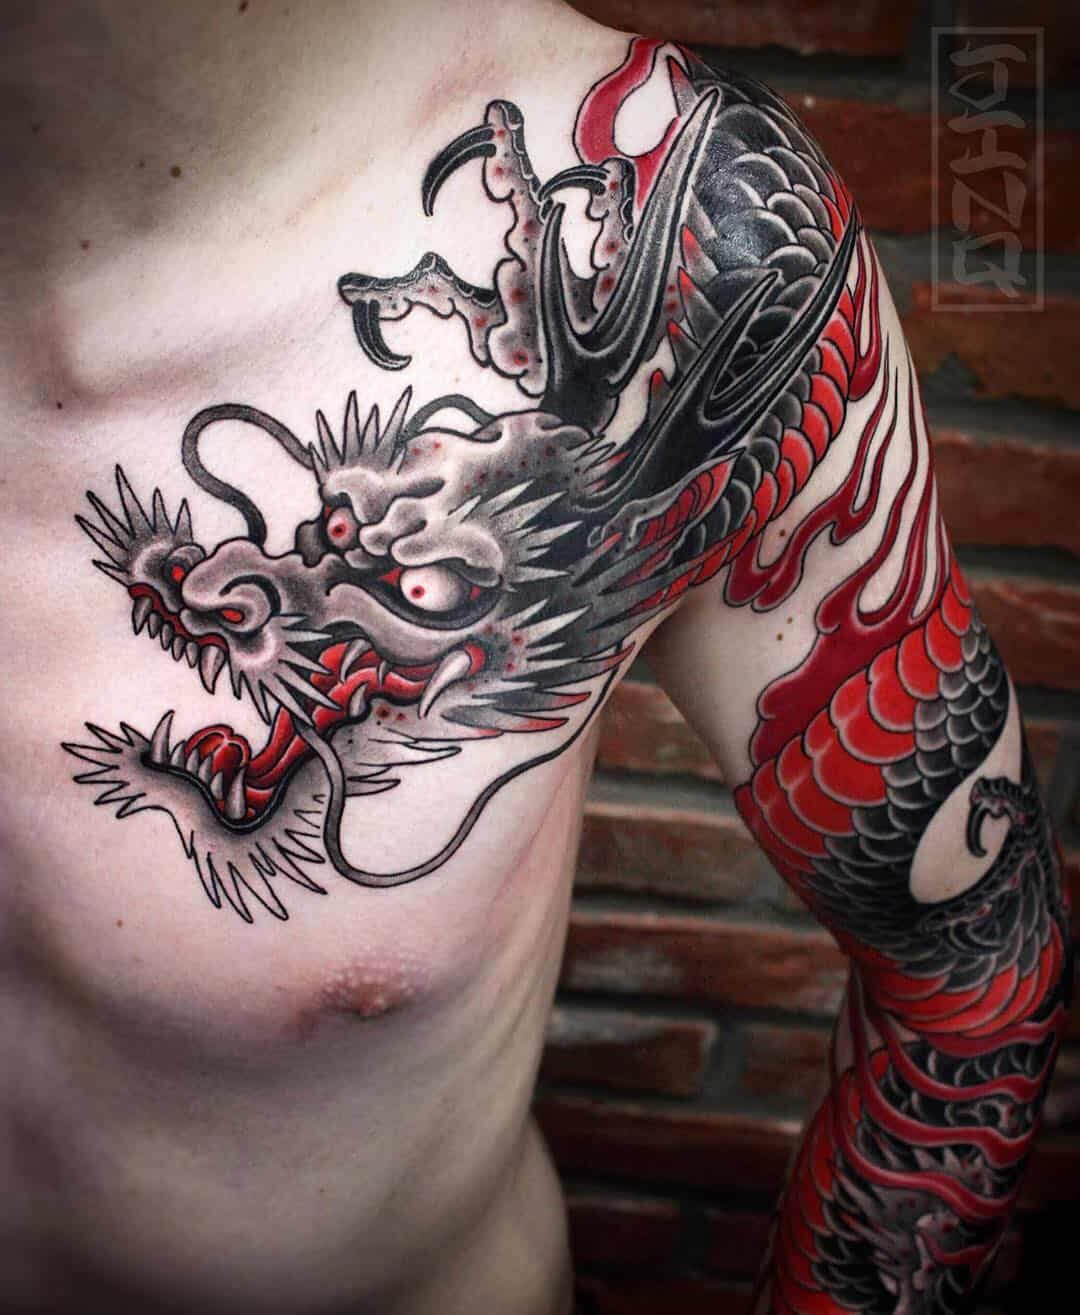 60 Dragon Tattoo Ideas To Copy To Live Your Fairytale Through Tattoos inside size 1080 X 1315